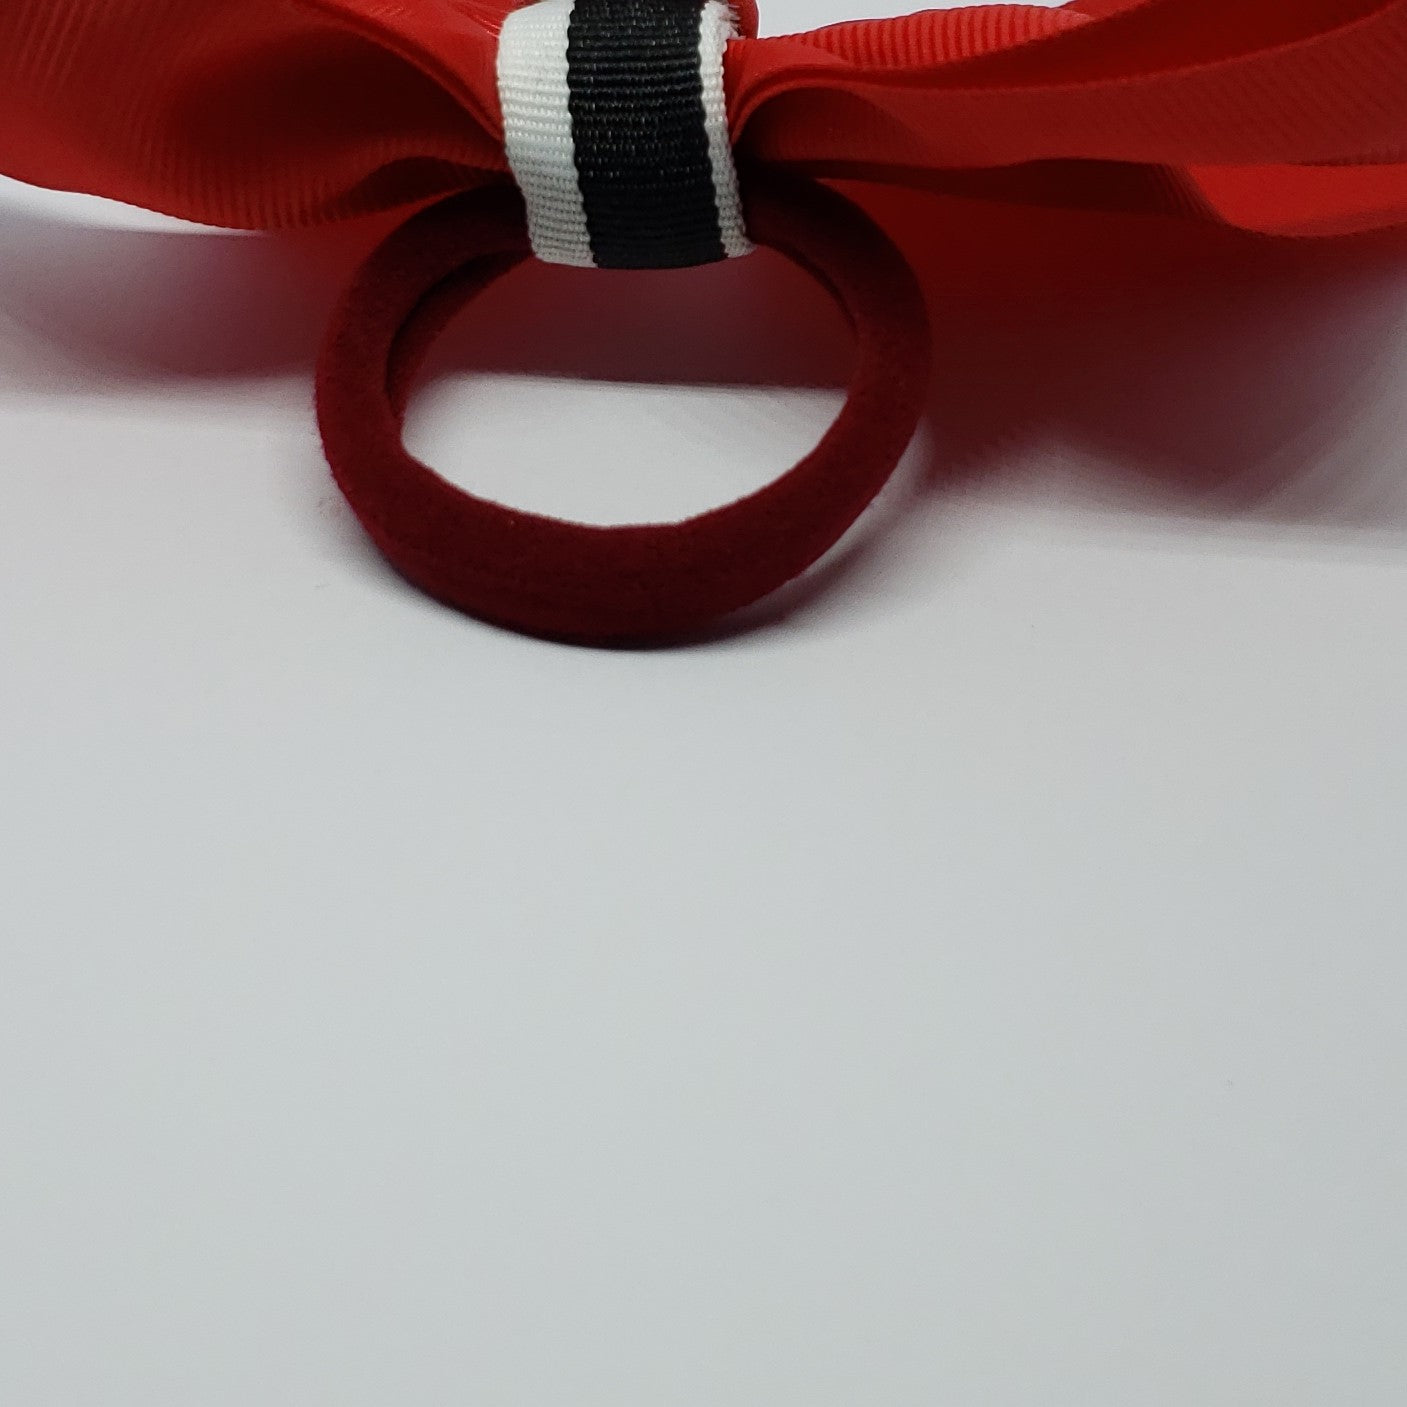 Cassidy-Dior Cheer Style Bow in Red, Navy, Black & White - Houzz of DVA Boutique